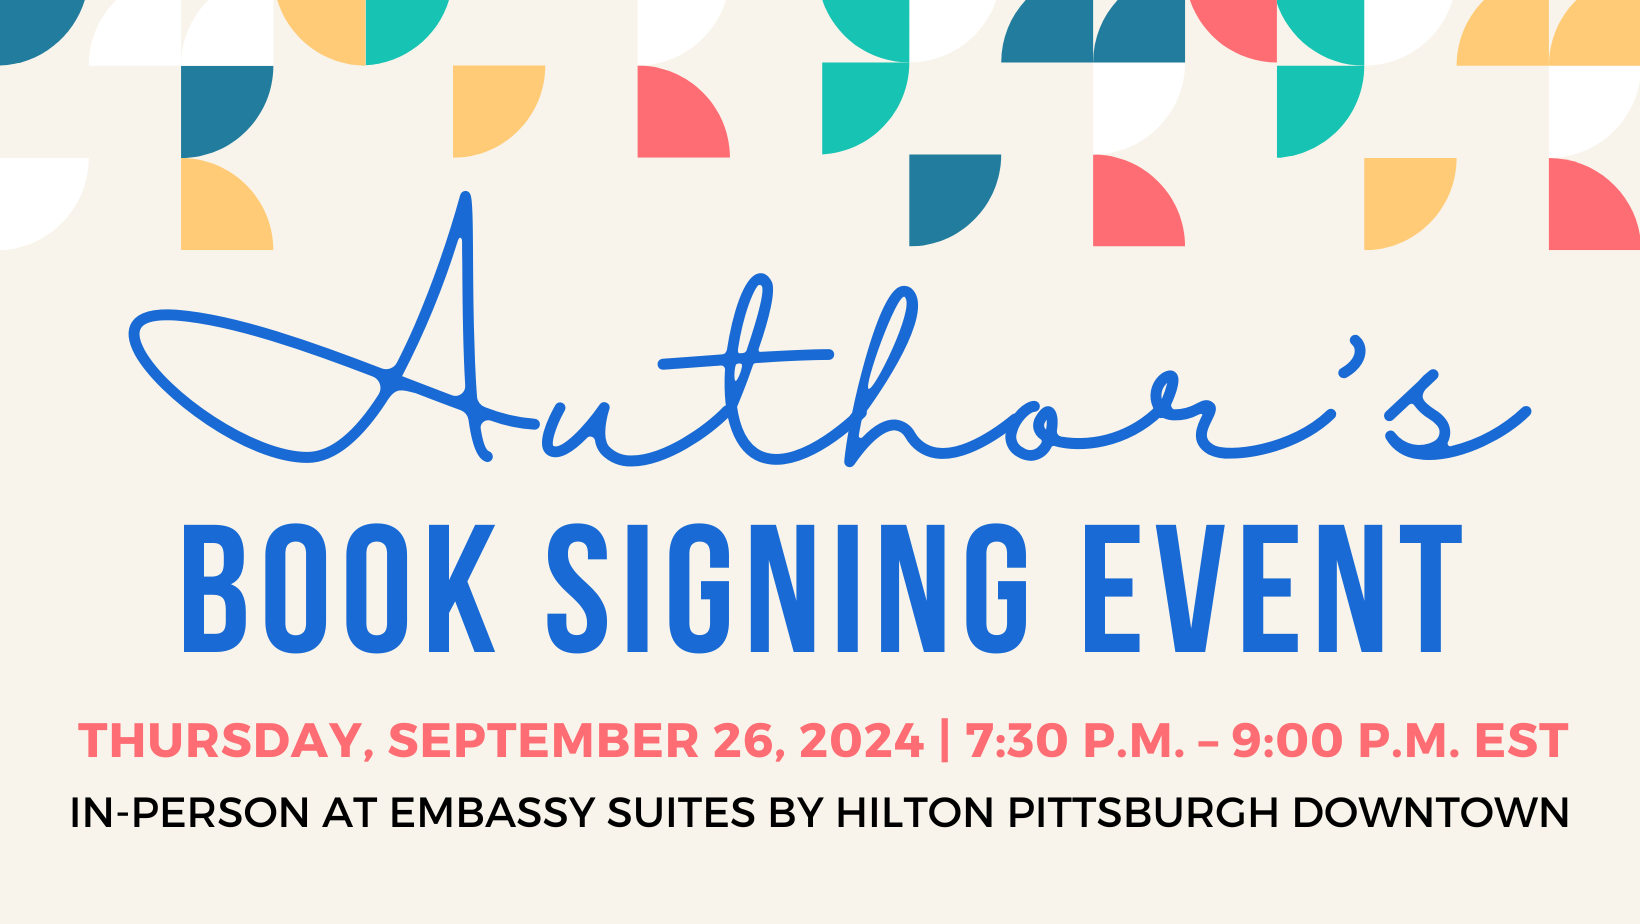 Authors Book Signing Event - Thursday, Sept. 26, 2024 | 7:30 pm - 9 pm EST. In-person at Embassy Suites by Hilton Pittsburgh Downtown